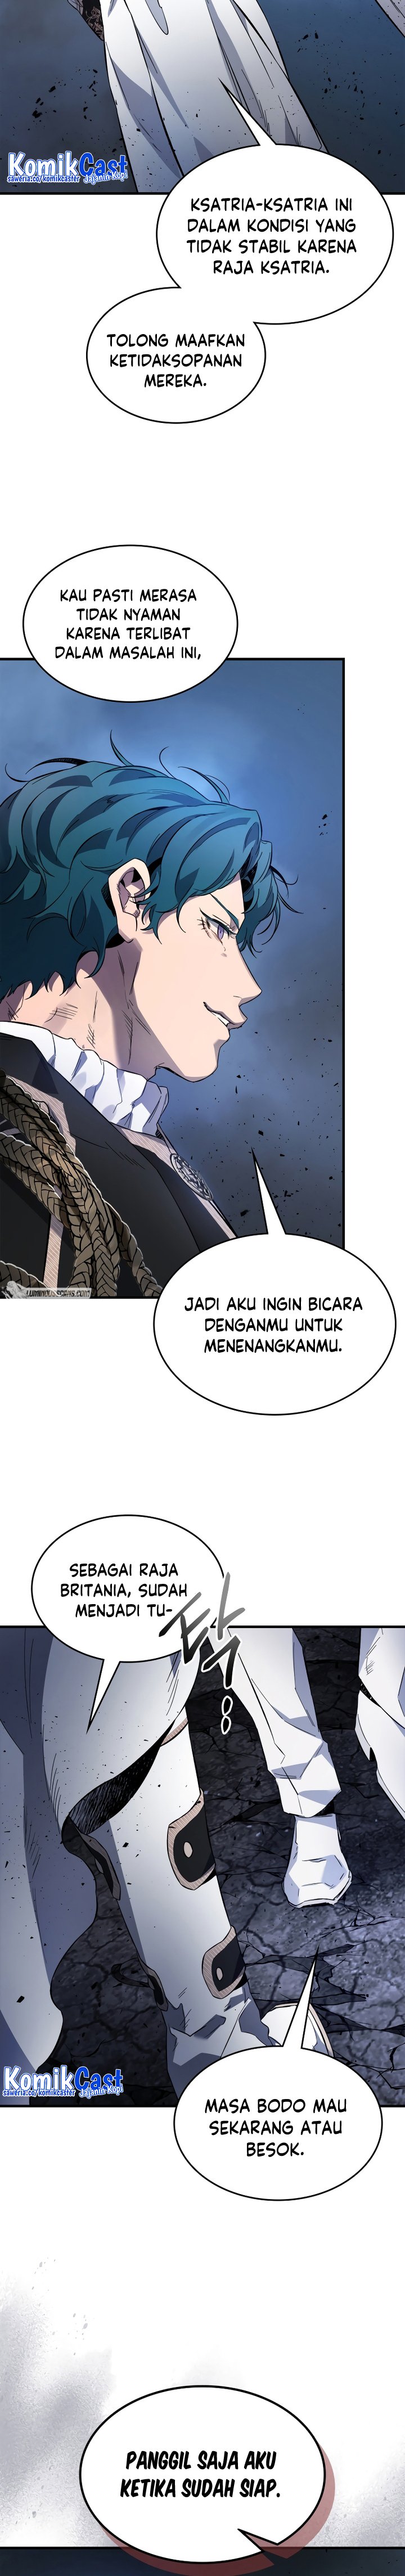 Leveling With The Gods Chapter 89